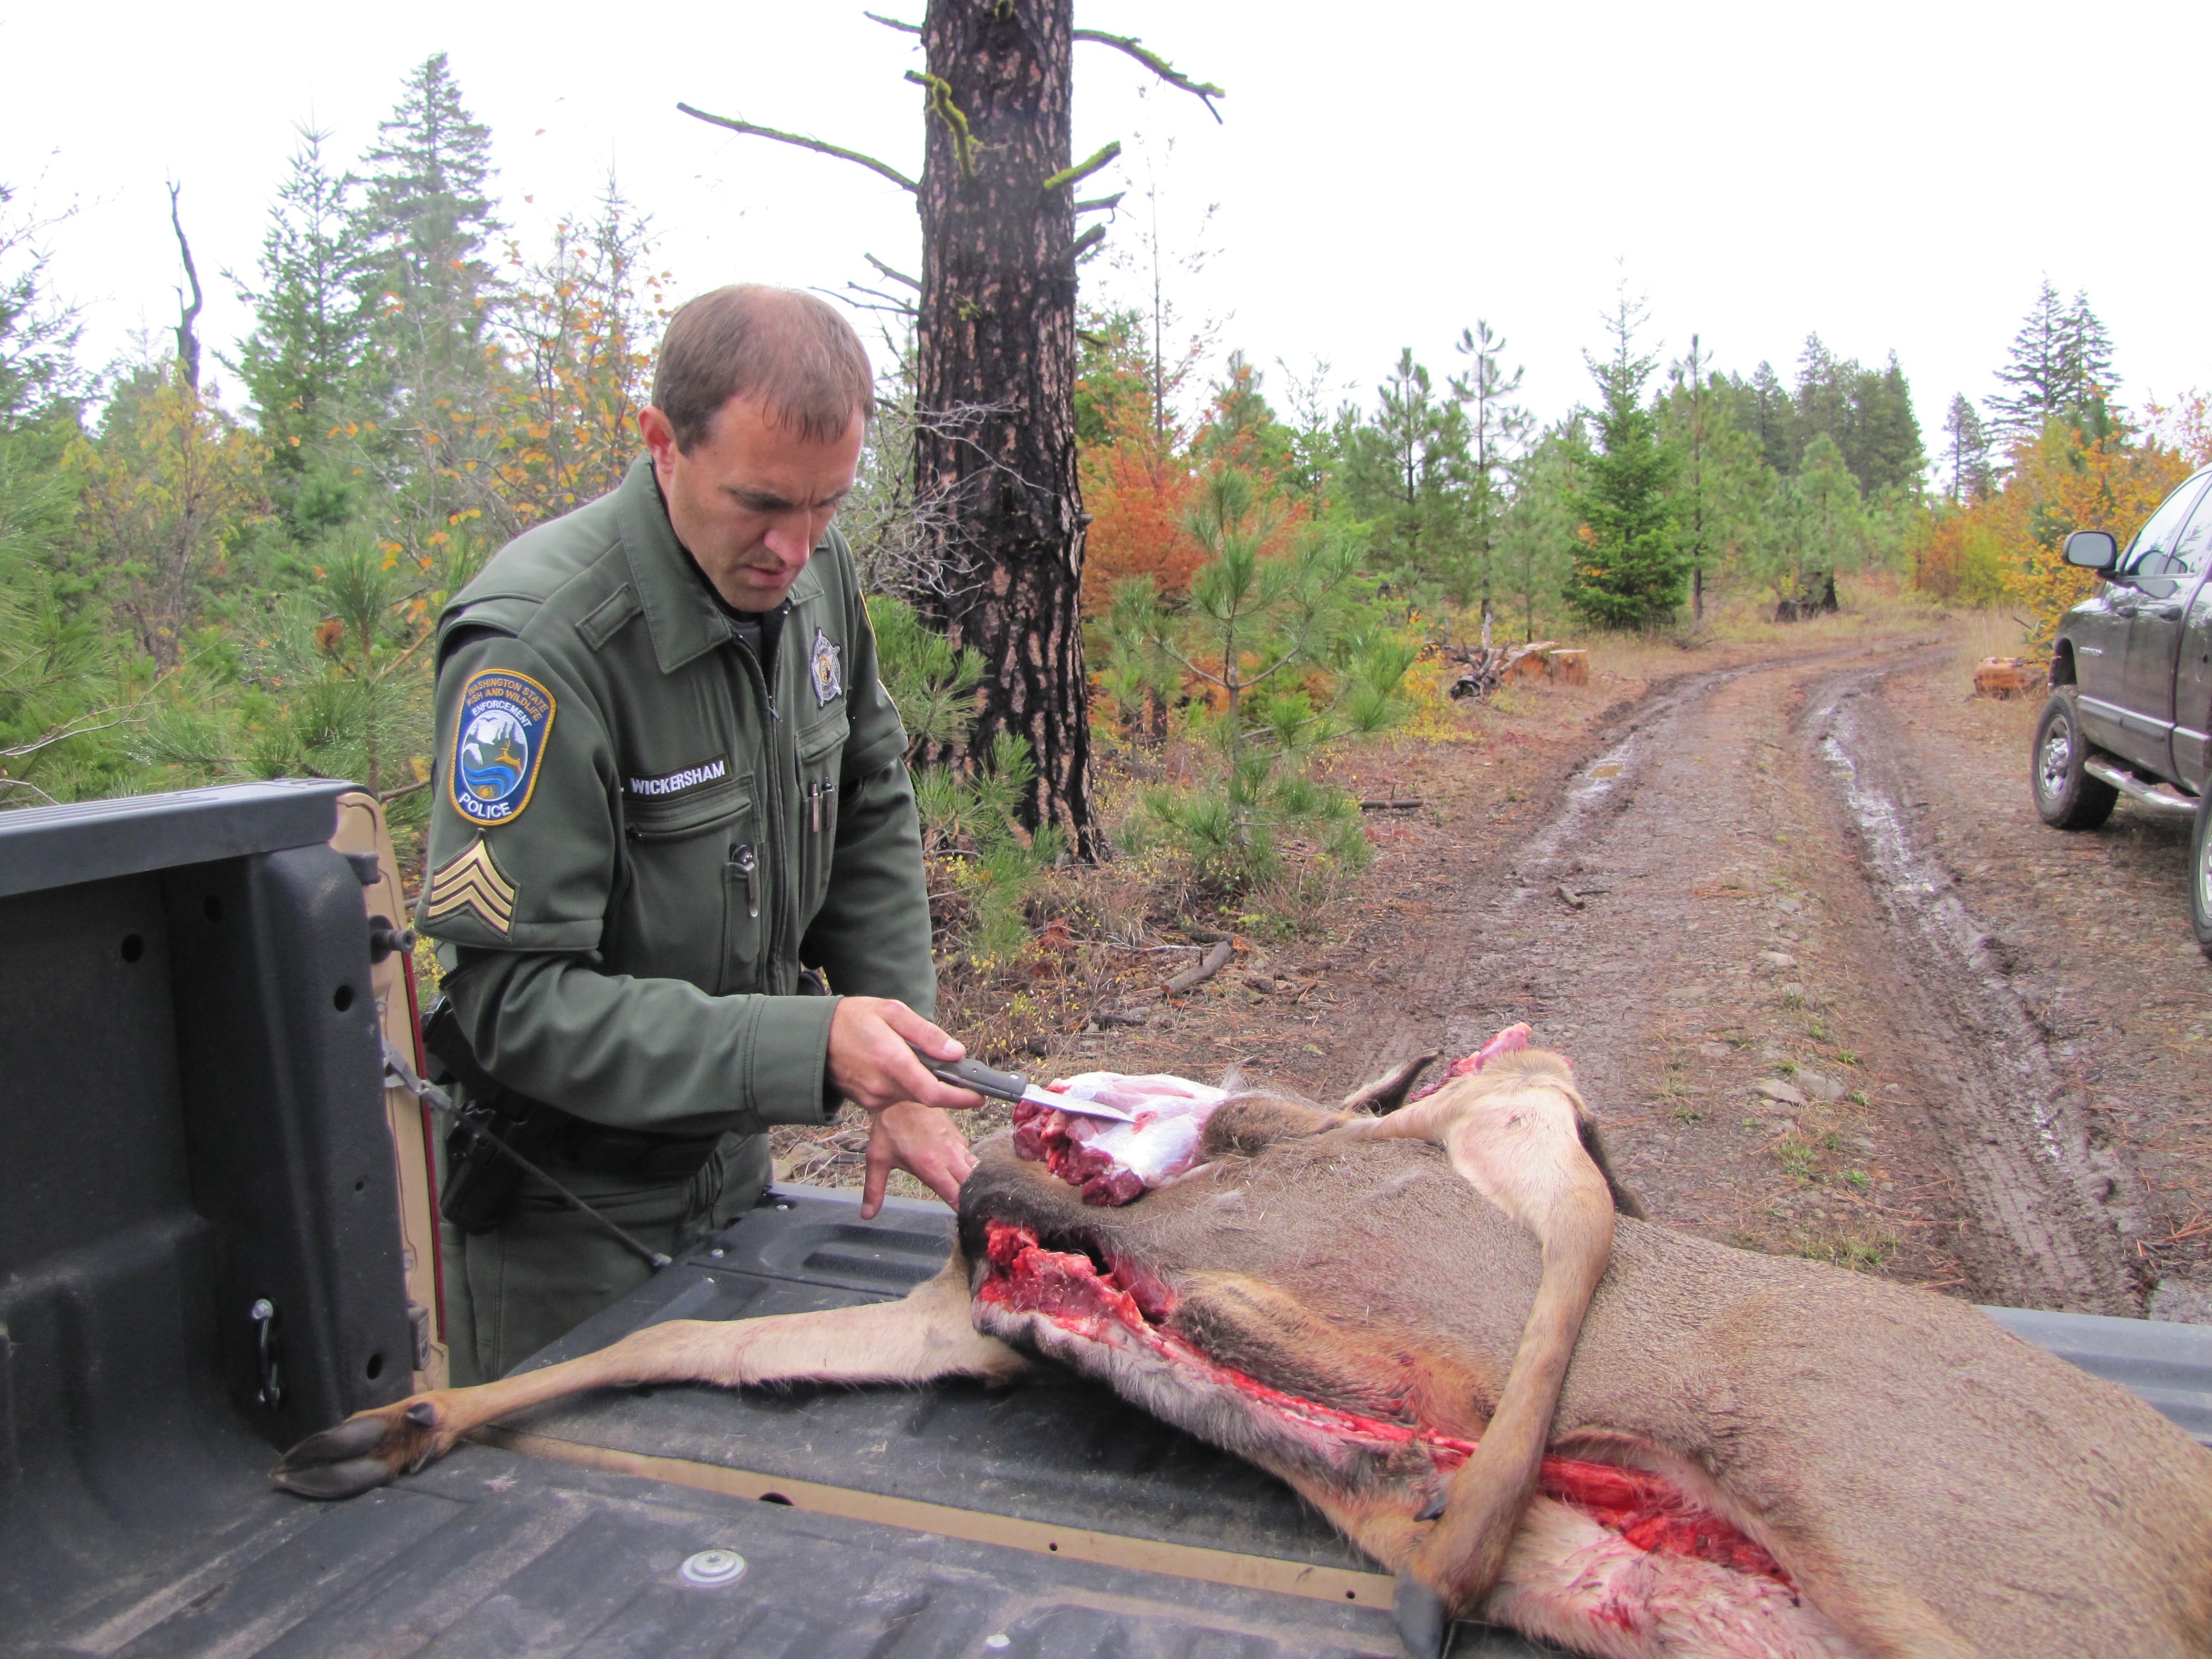 Washington Department of Fish and Wildlife Police Sgt. Jeff Wickersham points with his knife to the spot where the bullet hit this poached deer.